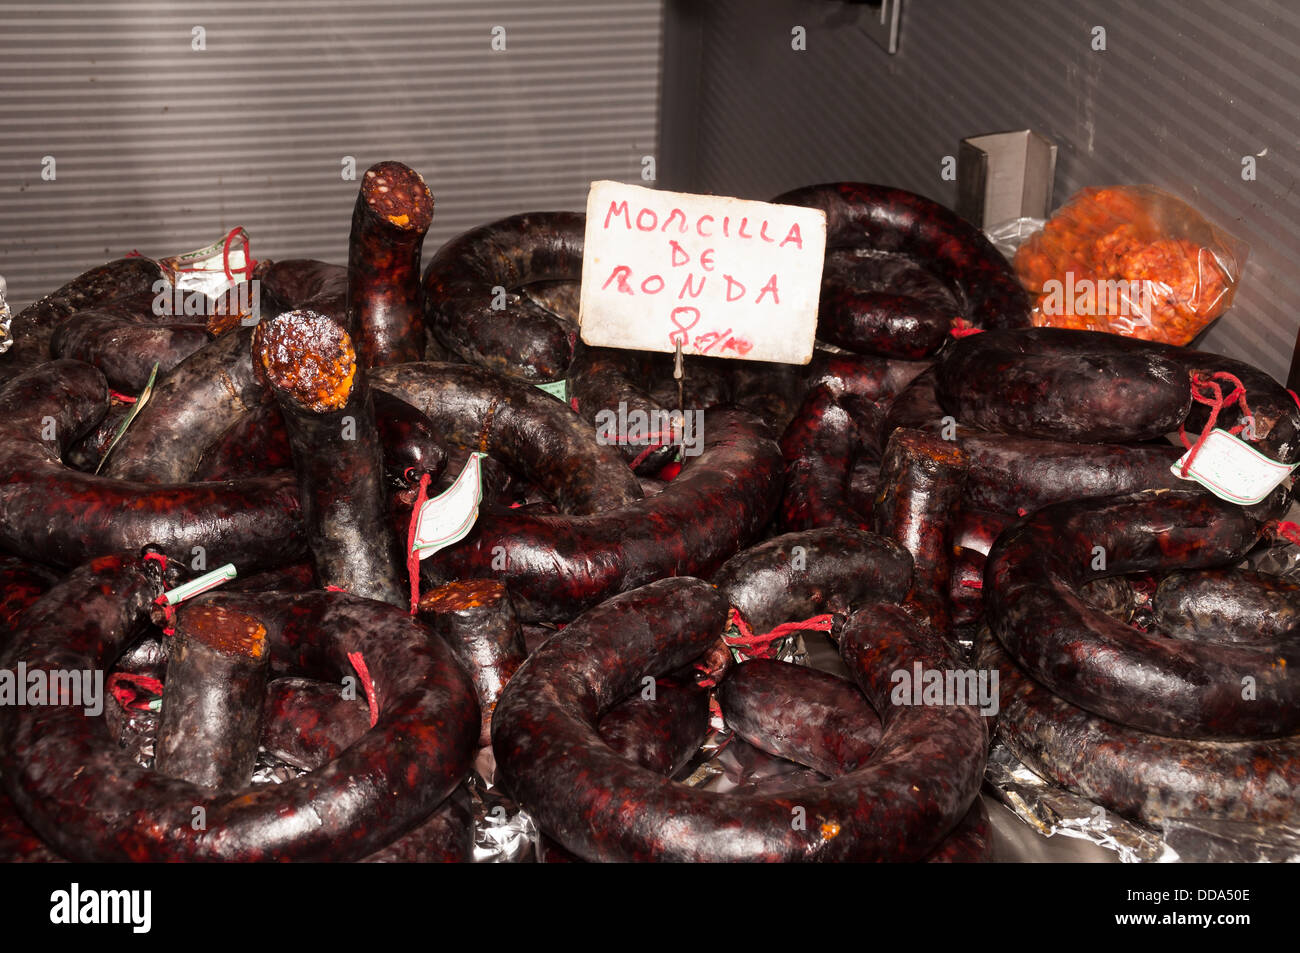 Black pudding for sale in a indoor market in Malaga Stock Photo